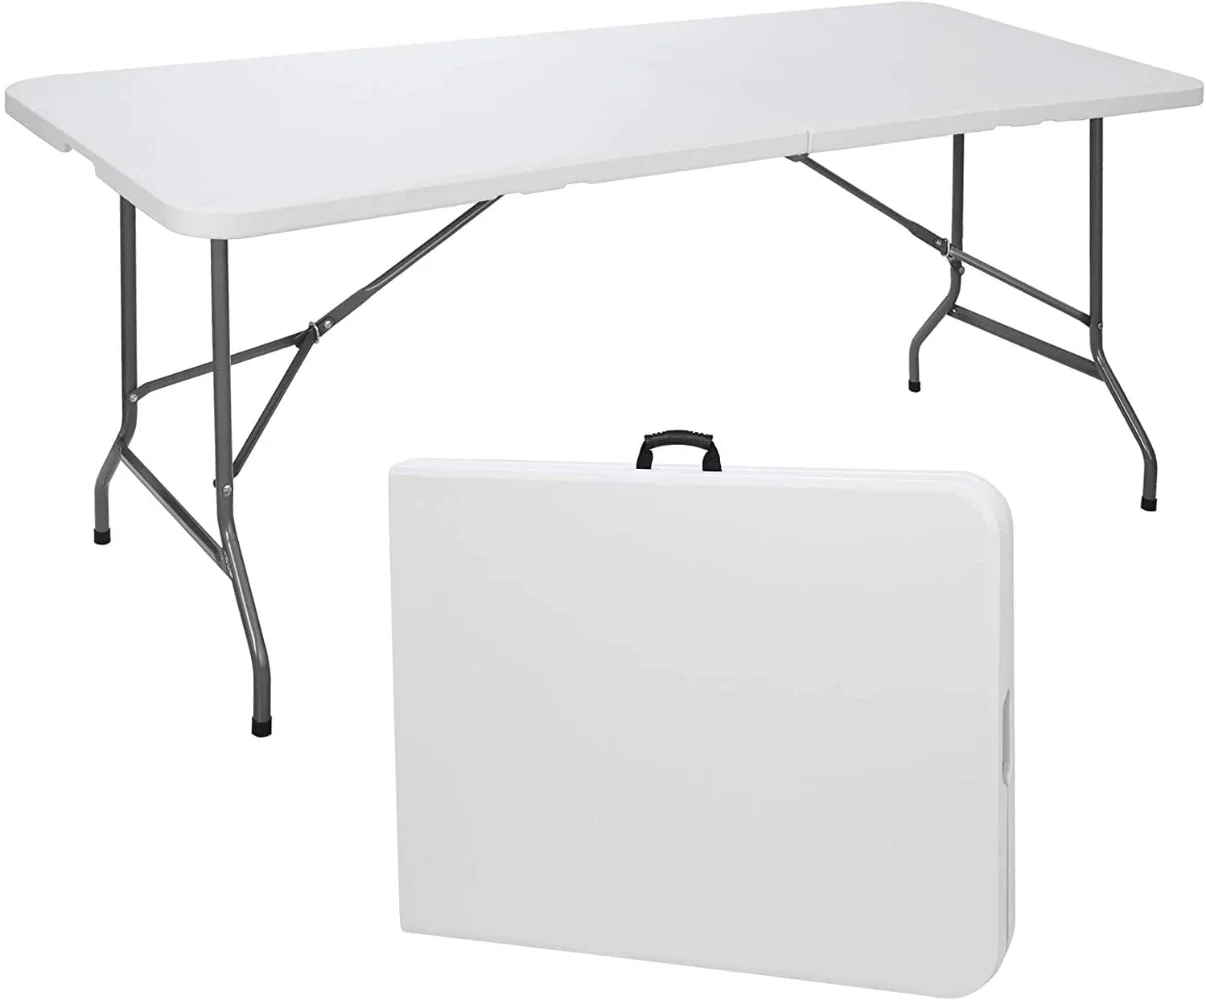 6 FT Portable Picnic Folding Table for Indoor and Outdoor, 72